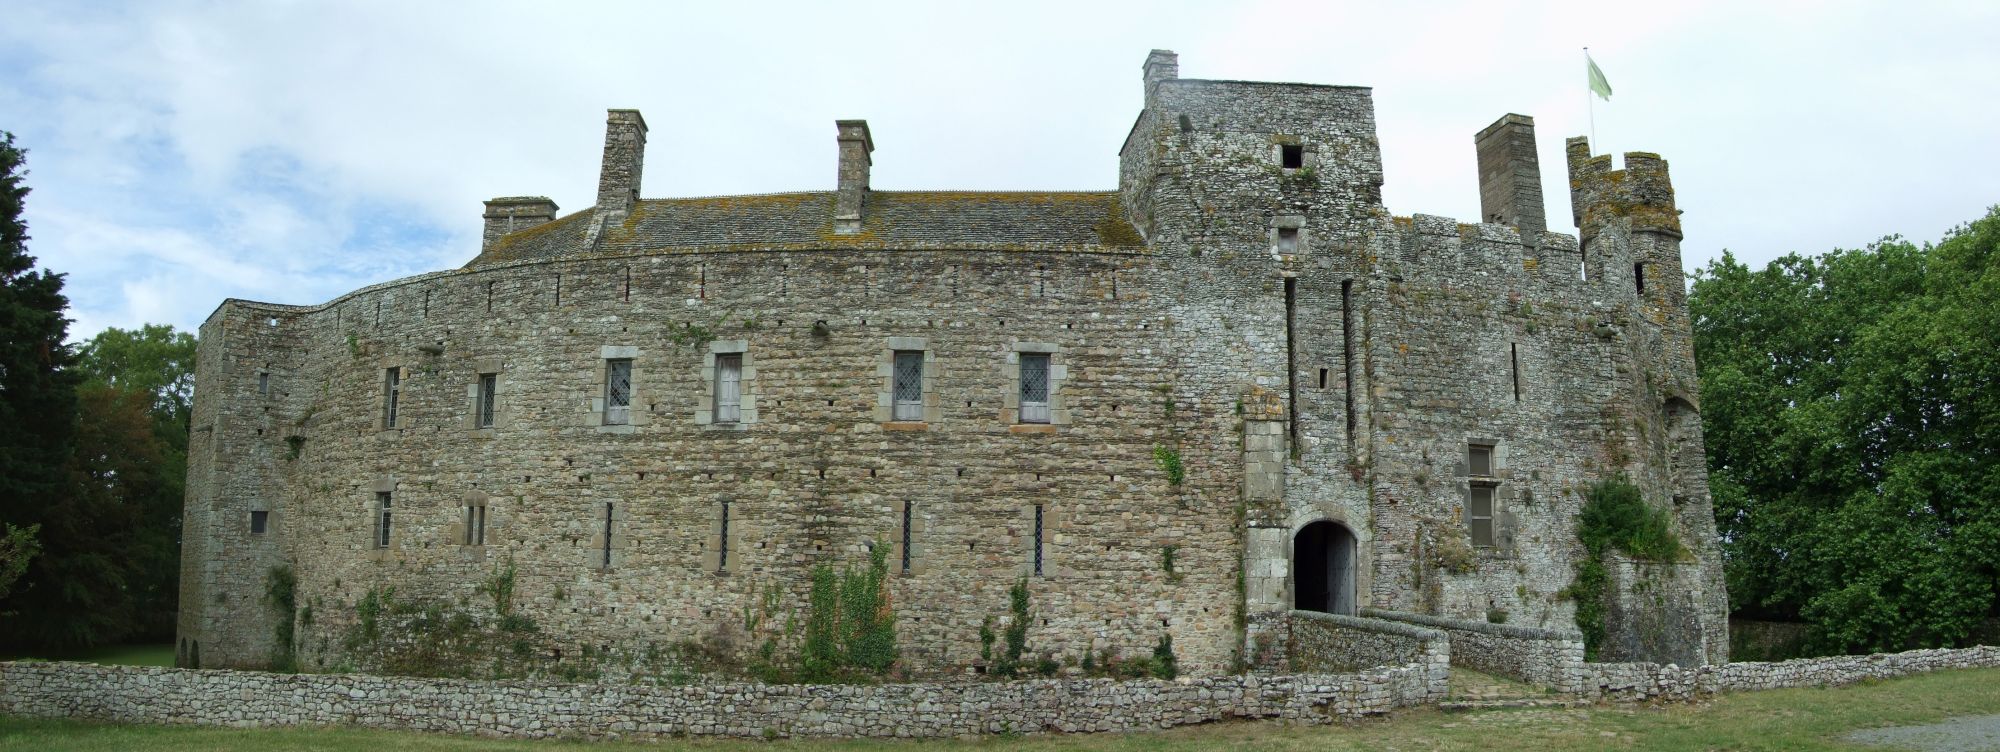 A panoramic view of an old castle fortress